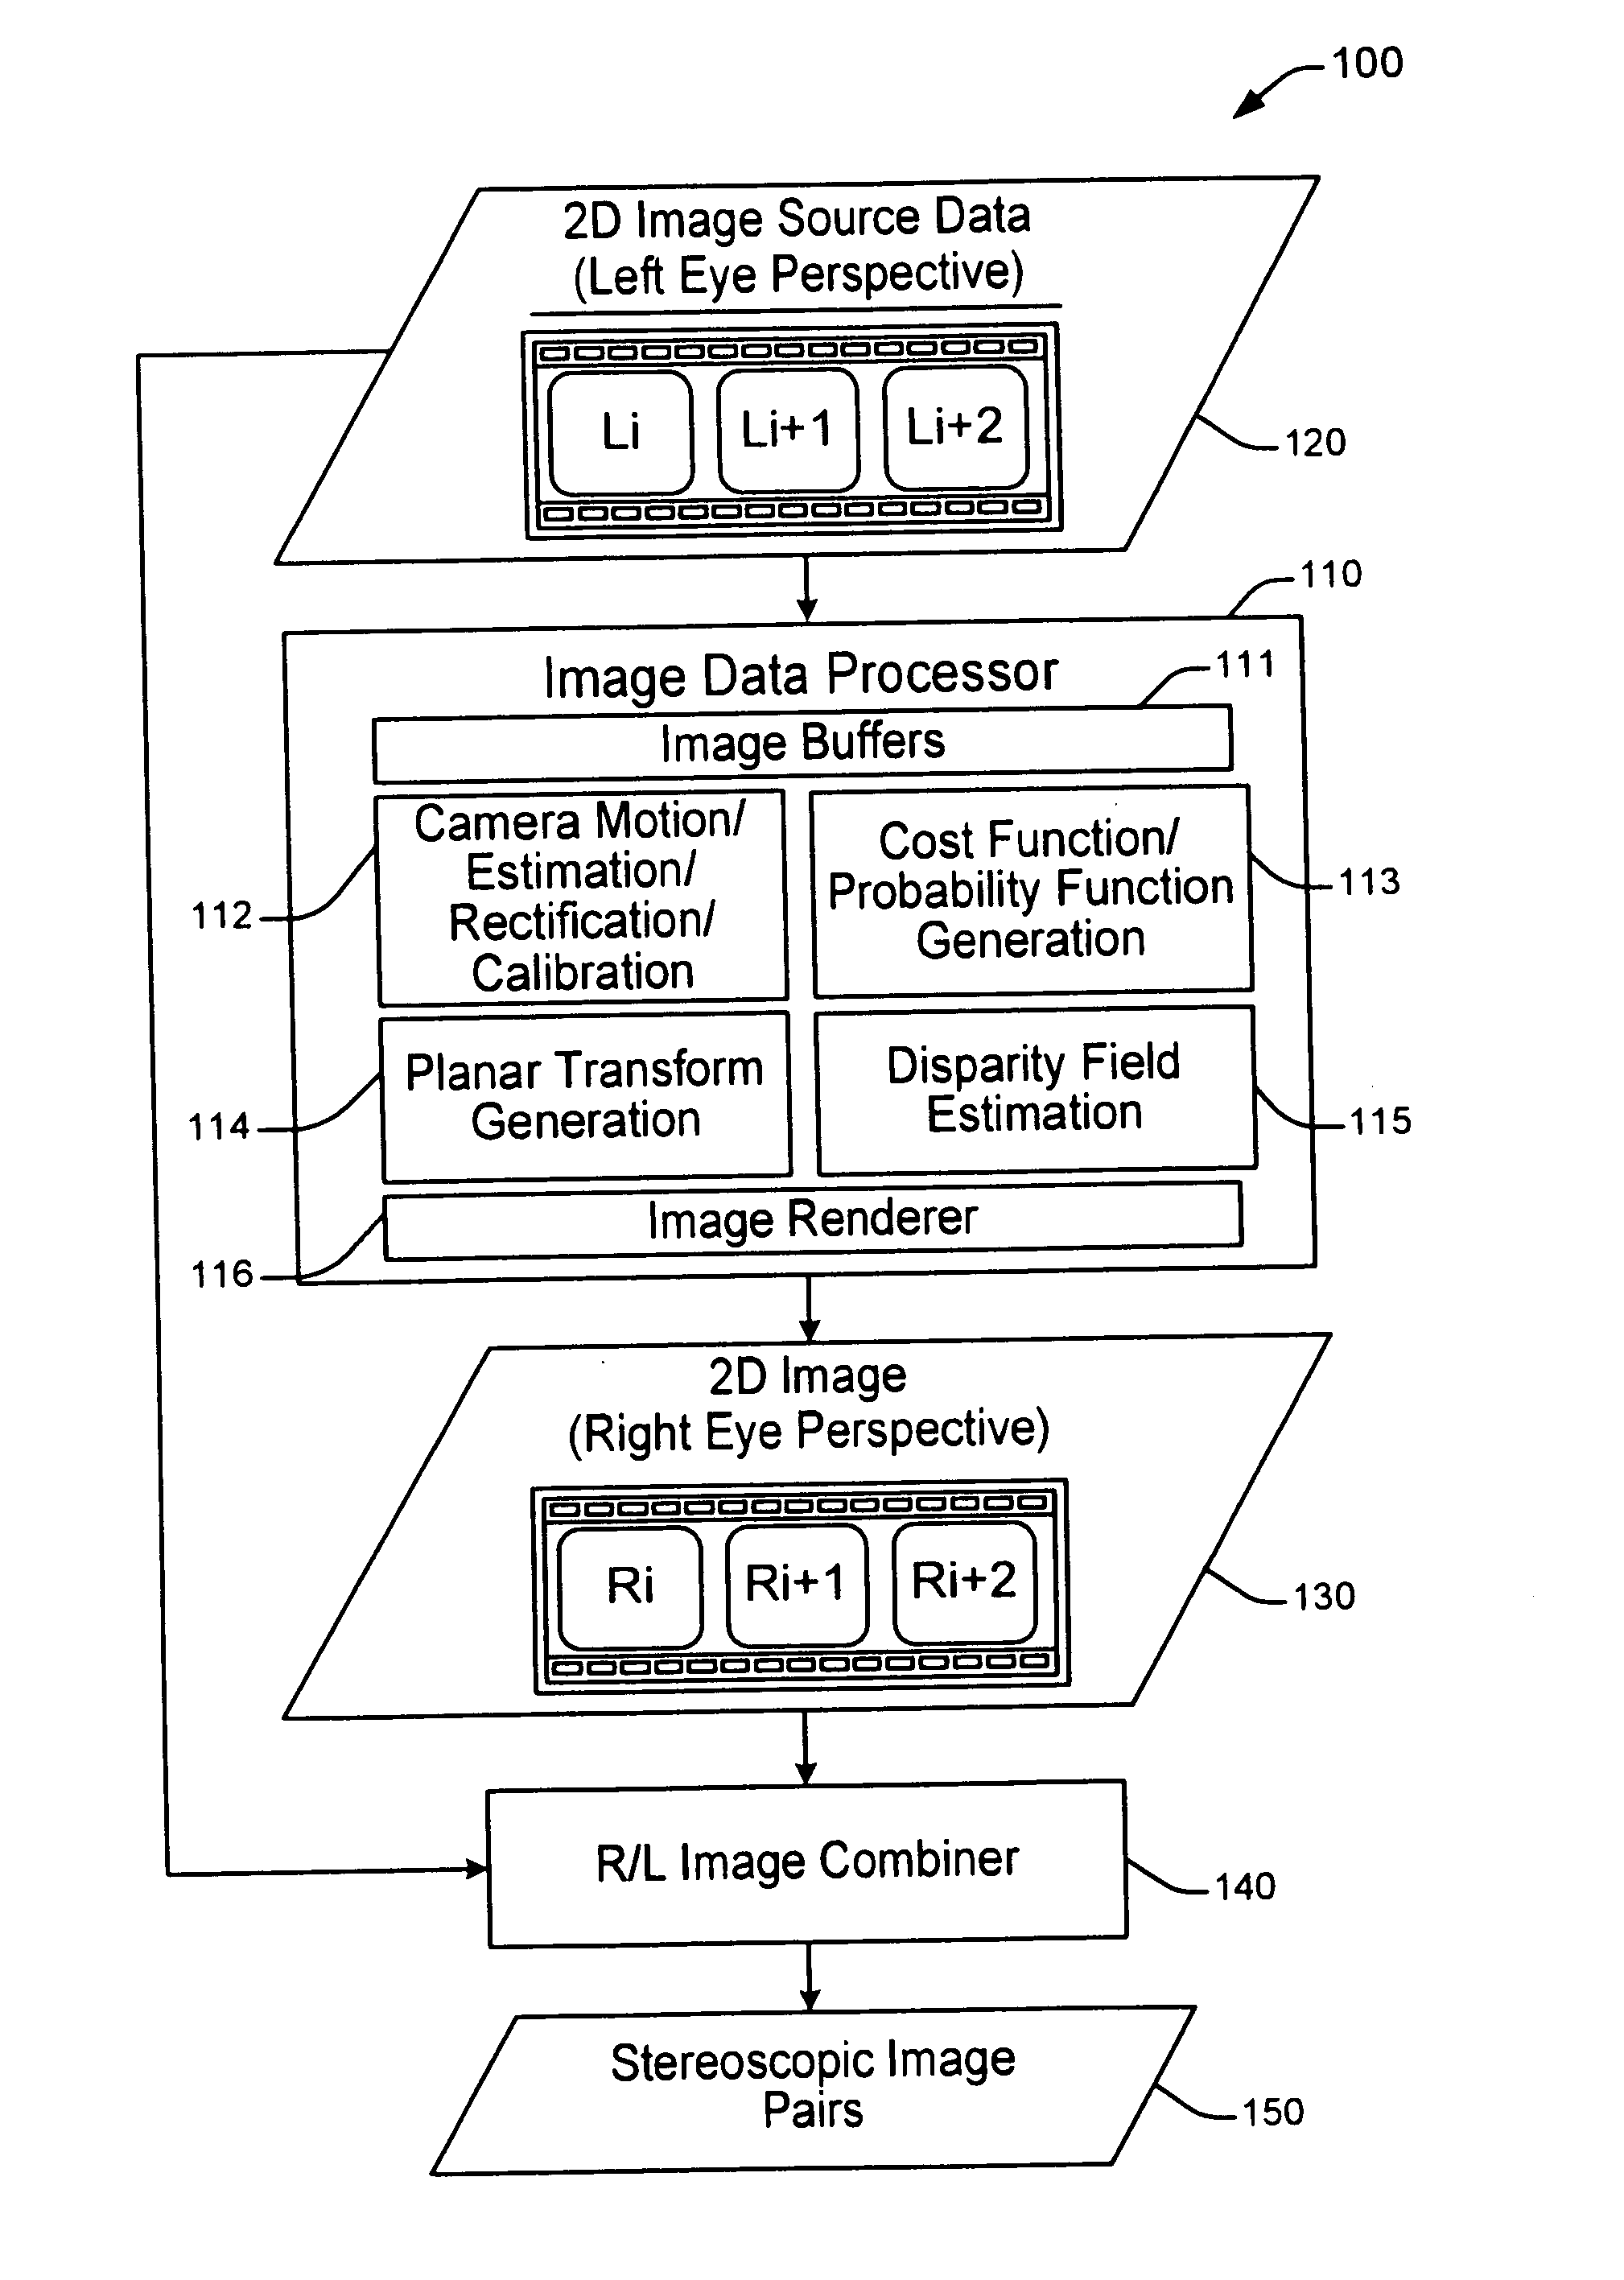 Method and system for converting 2d image data to stereoscopic image data